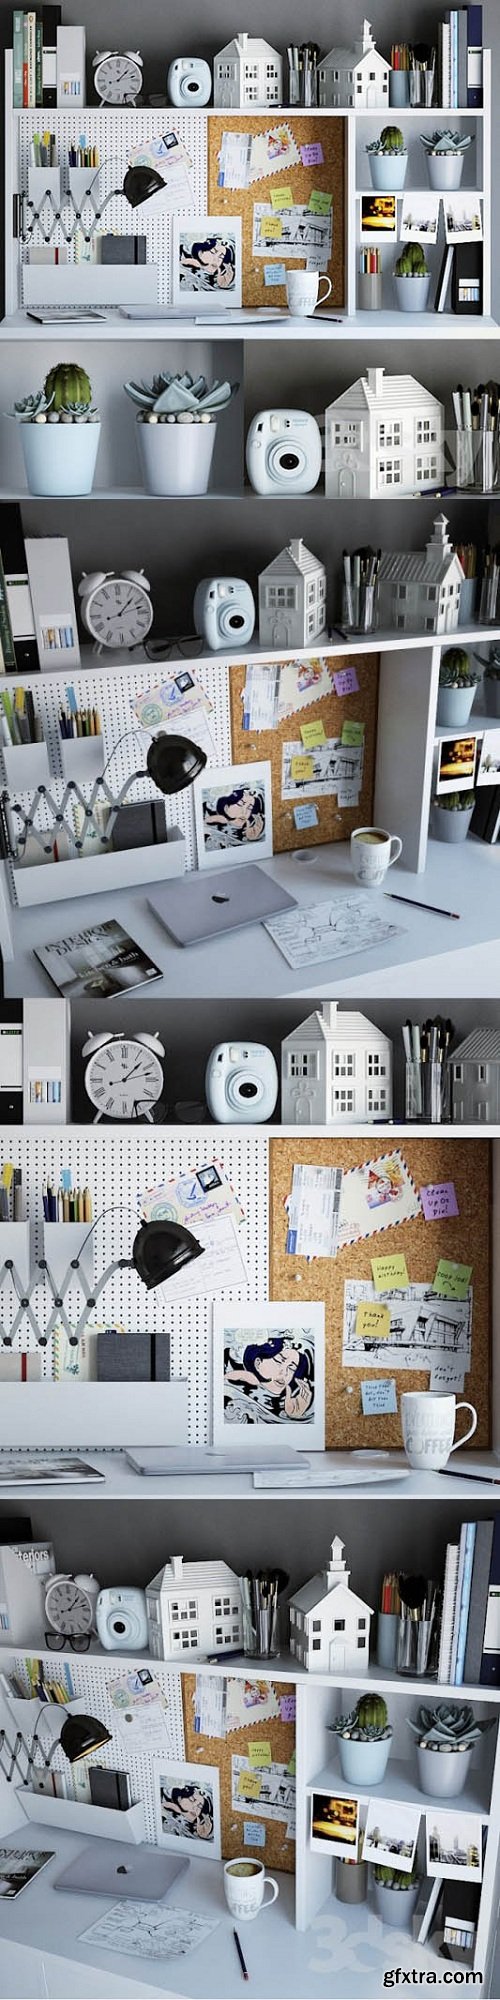 Decorative Set of Books, Stationery and Decor for Workspace